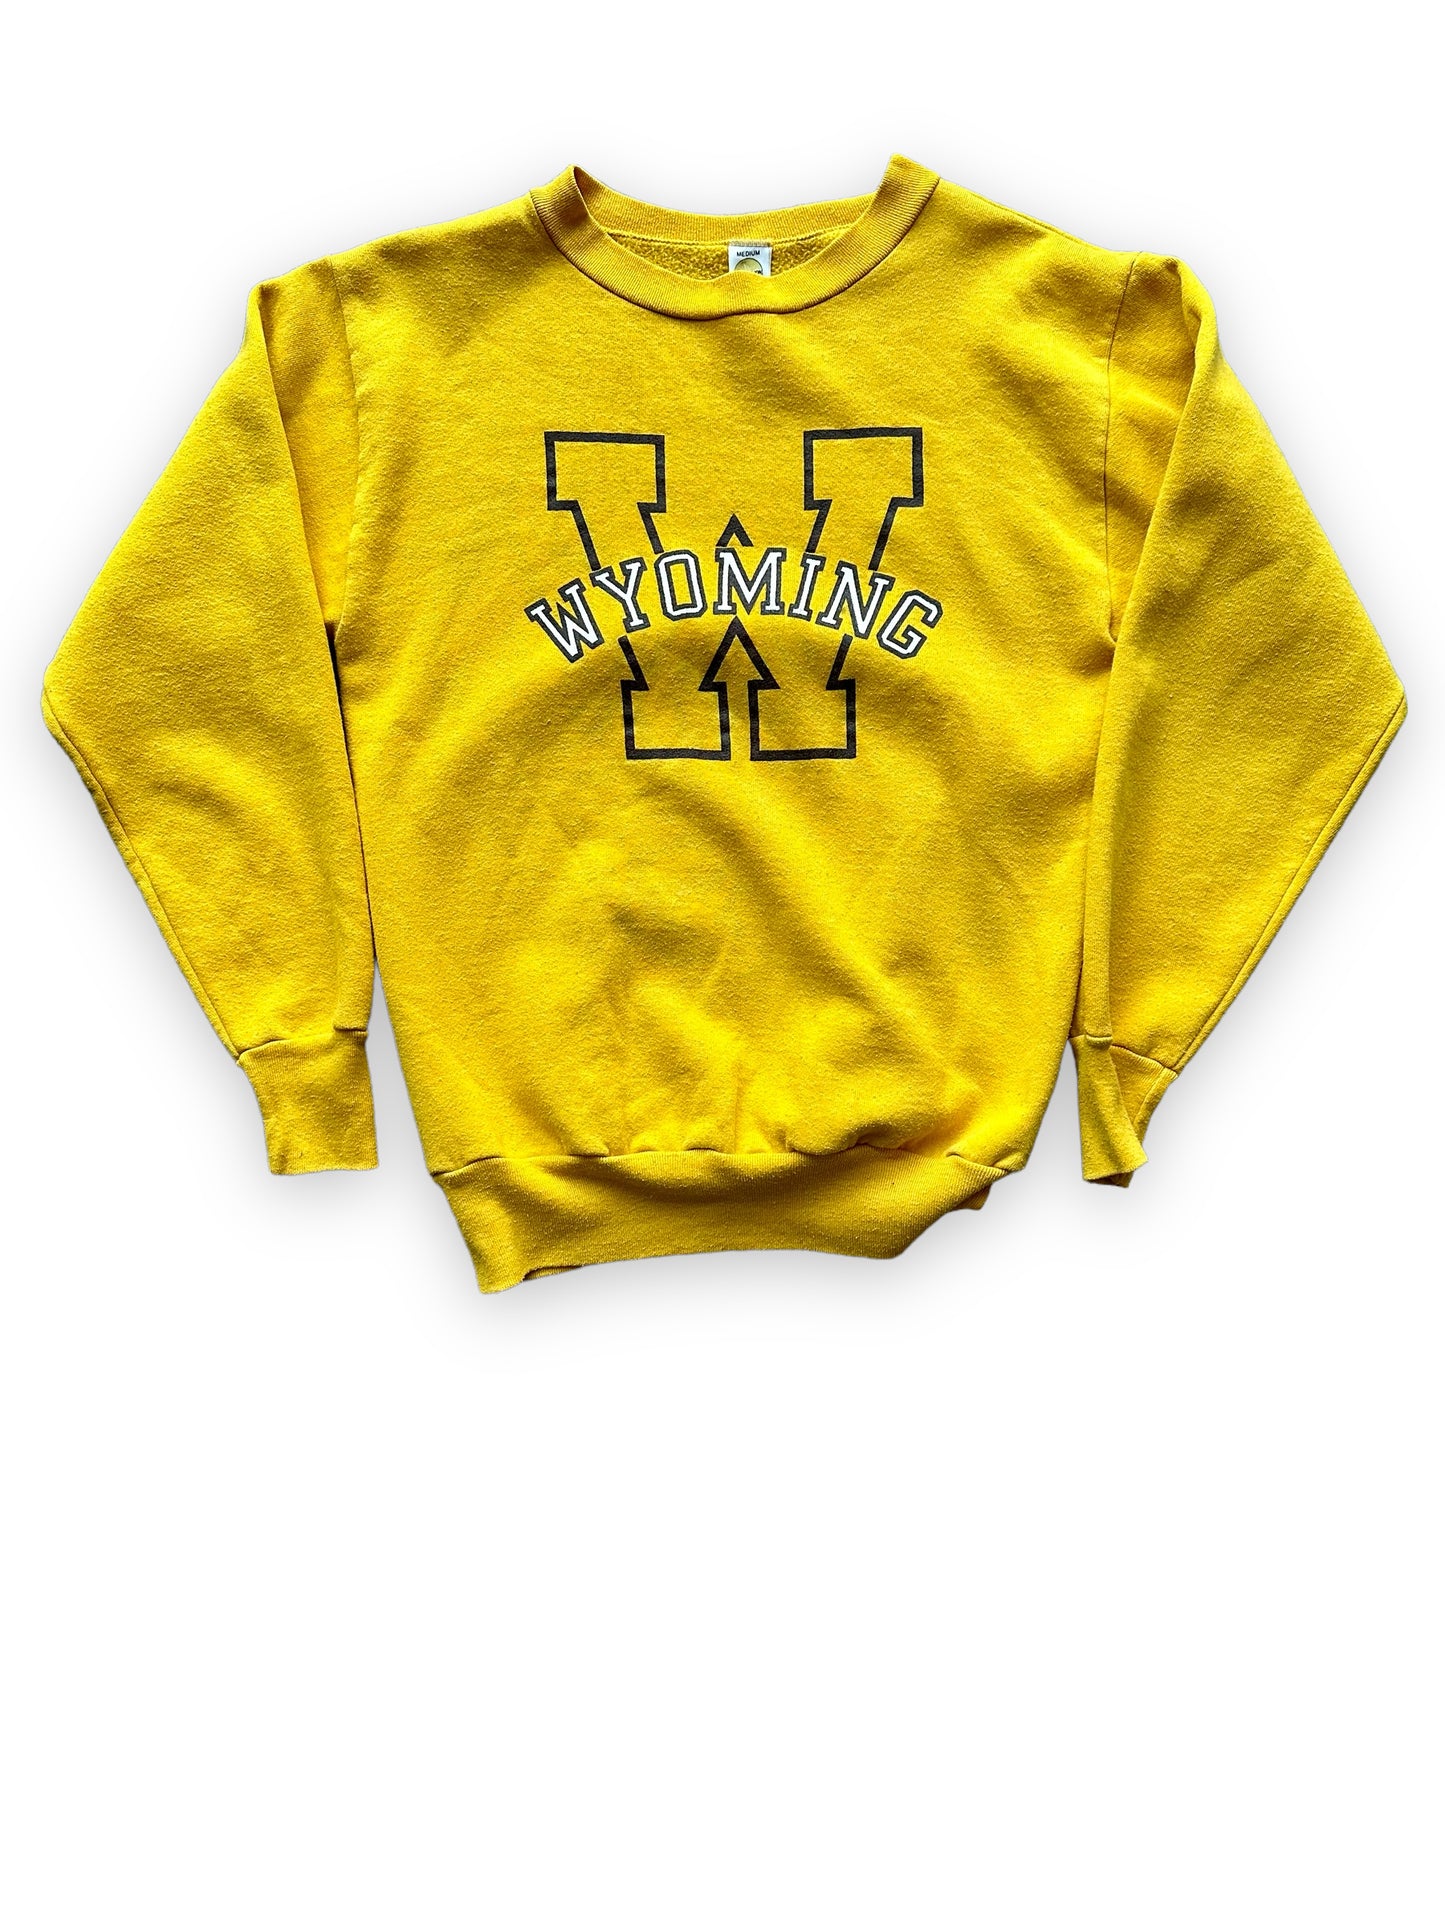 Front View of Vintage Yellow Wyoming Crewneck Sweatshirt SZ M | Vintage Crewneck Sweatshirt Seattle | Barn Owl Vintage Seattle